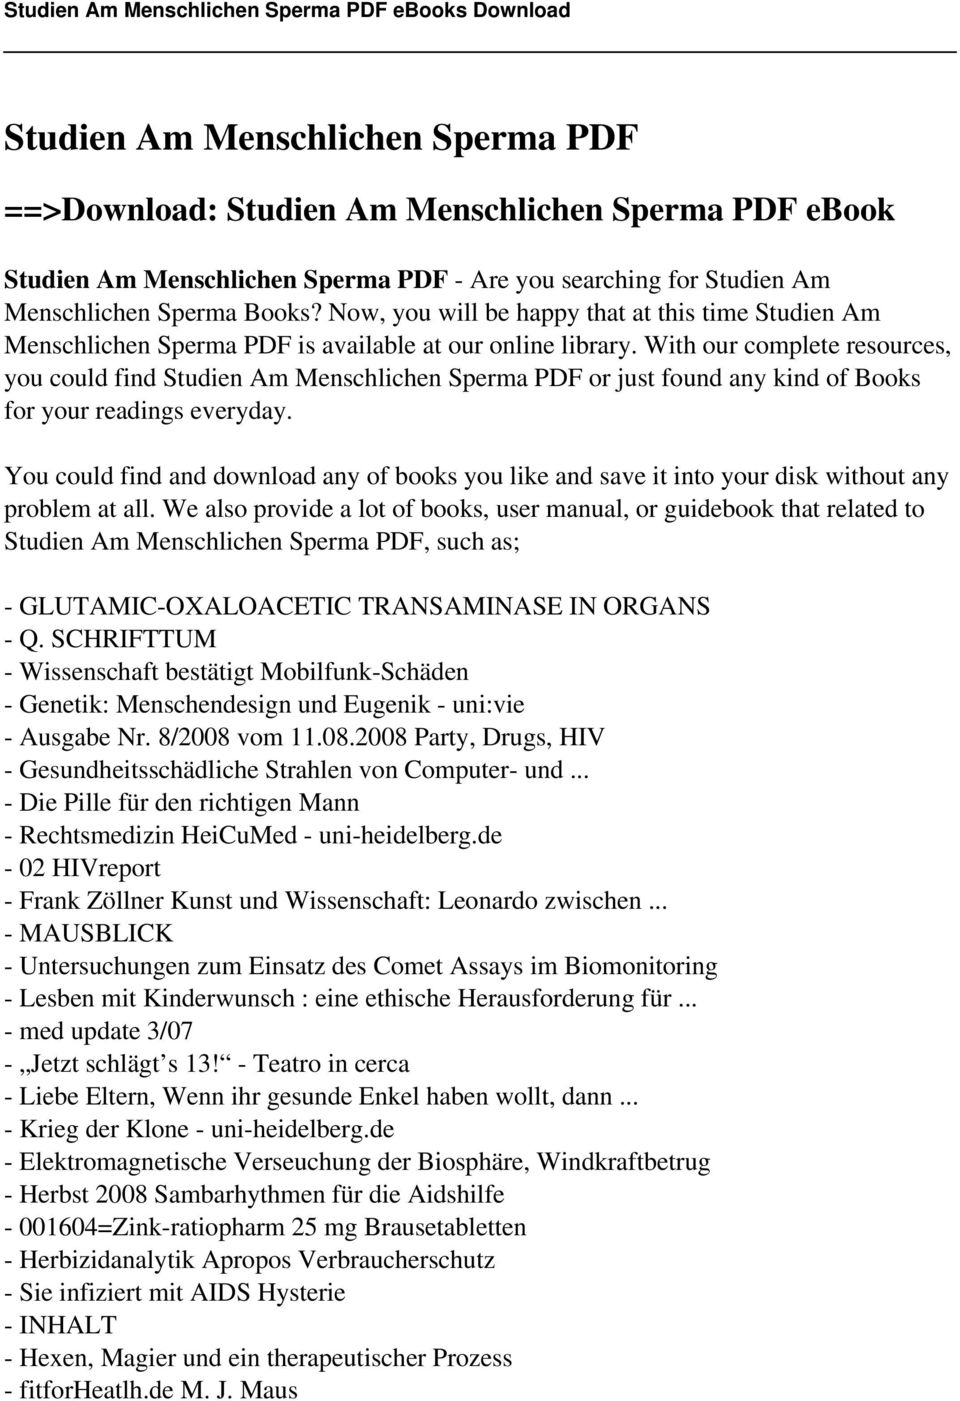 With our complete resources, you could find Studien Am Menschlichen Sperma PDF or just found any kind of Books for your readings everyday.